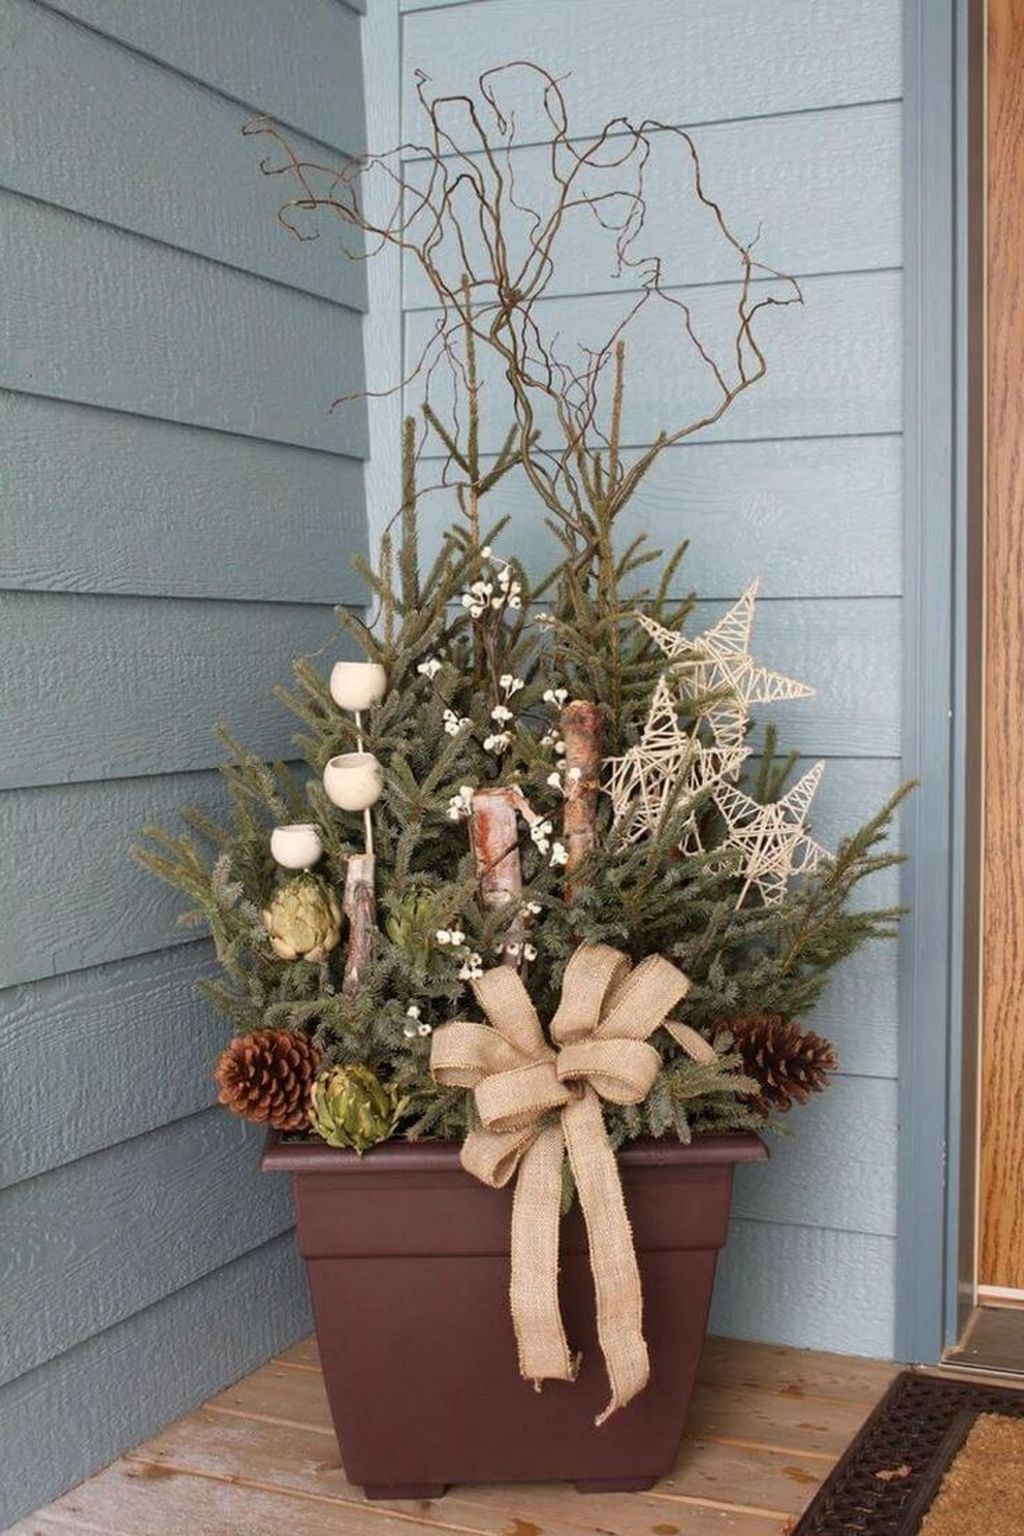 Marvelous Outdoor Holiday Planter Ideas To Beauty Porch Décor 06